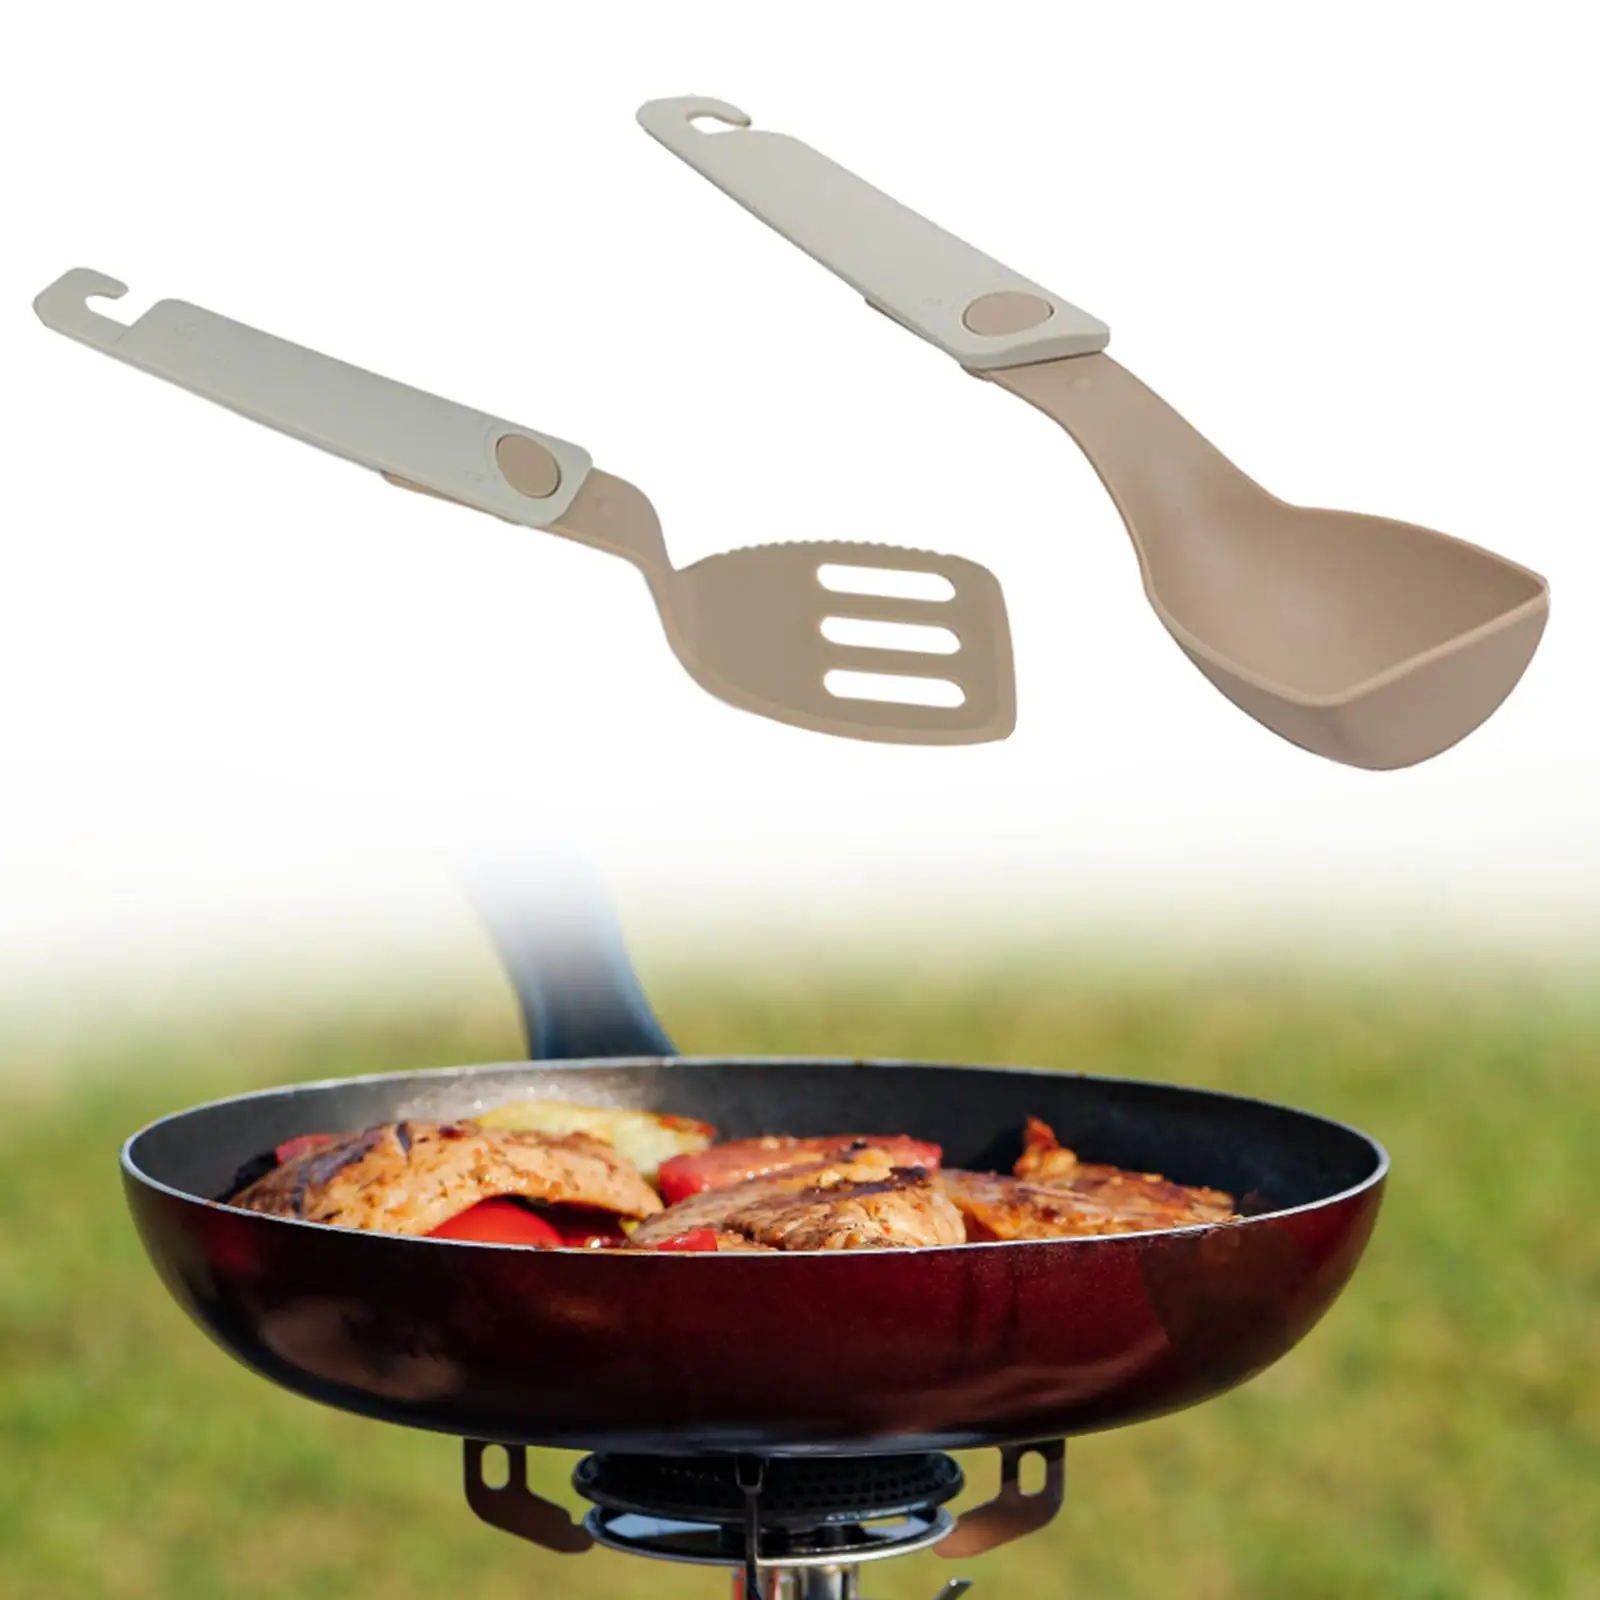 Camping Cutlery Folding Reusable Portable Cooking Utensil Outdoor Tableware Cookware for Kitchen Barbecue Hiking Travel Picnic